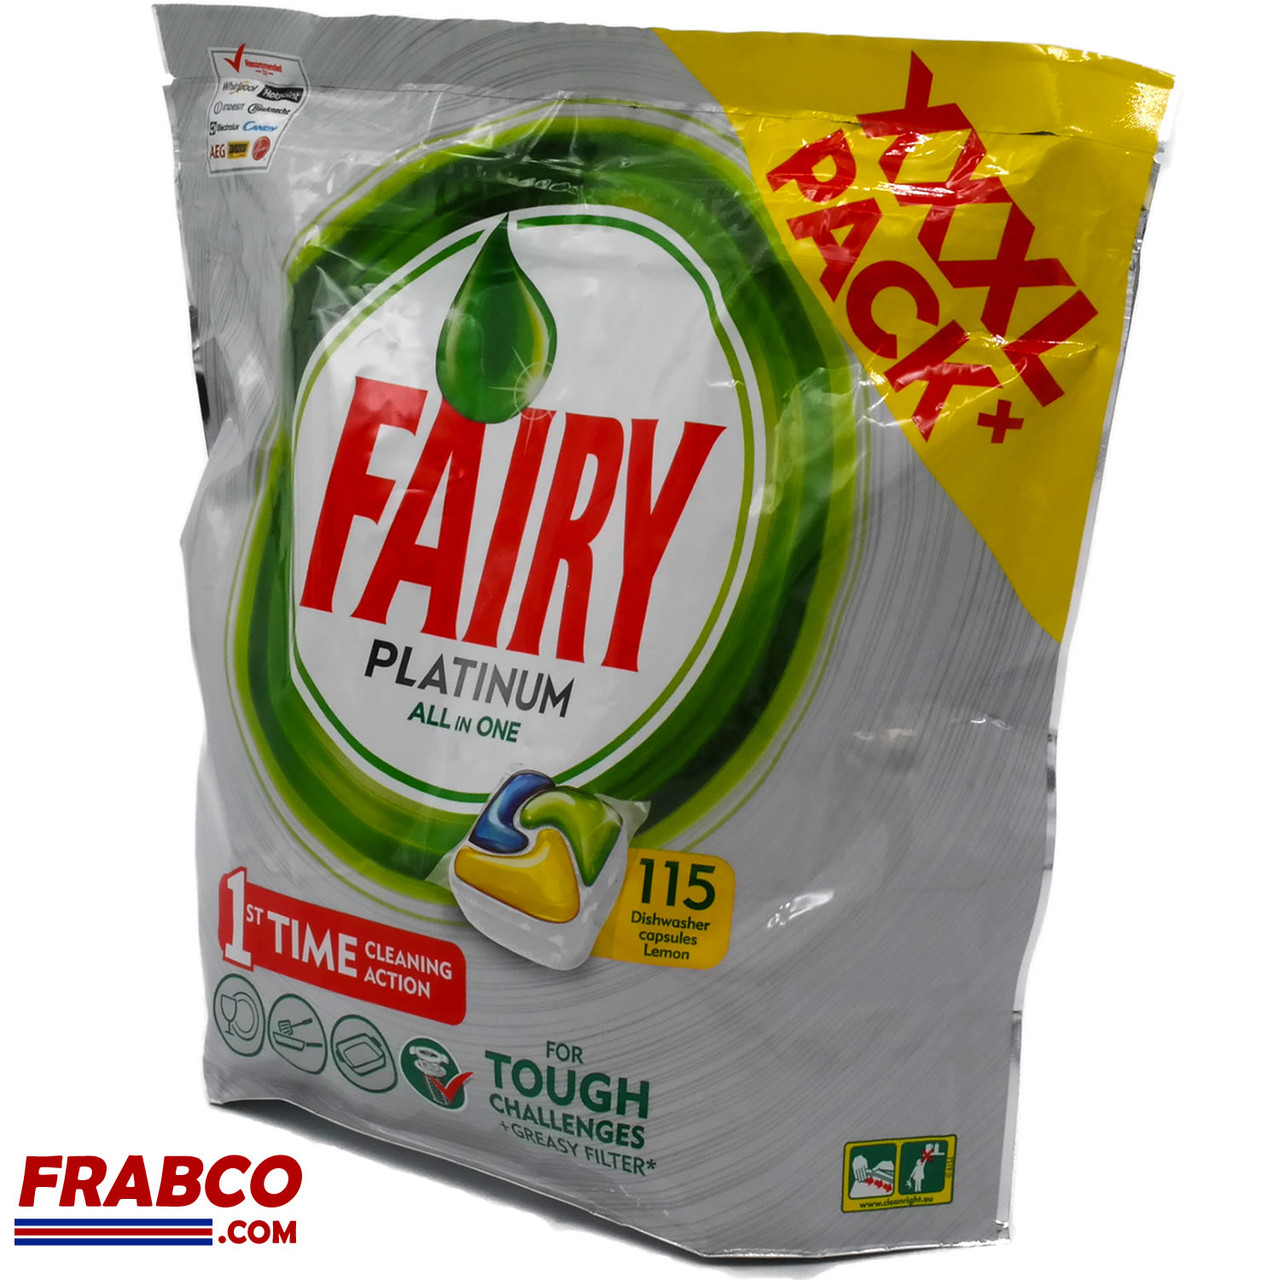 Fairy Platinum All In One Xxxl Pack 115 Lemon Dishwasher Capsules In Dish Pot Washing